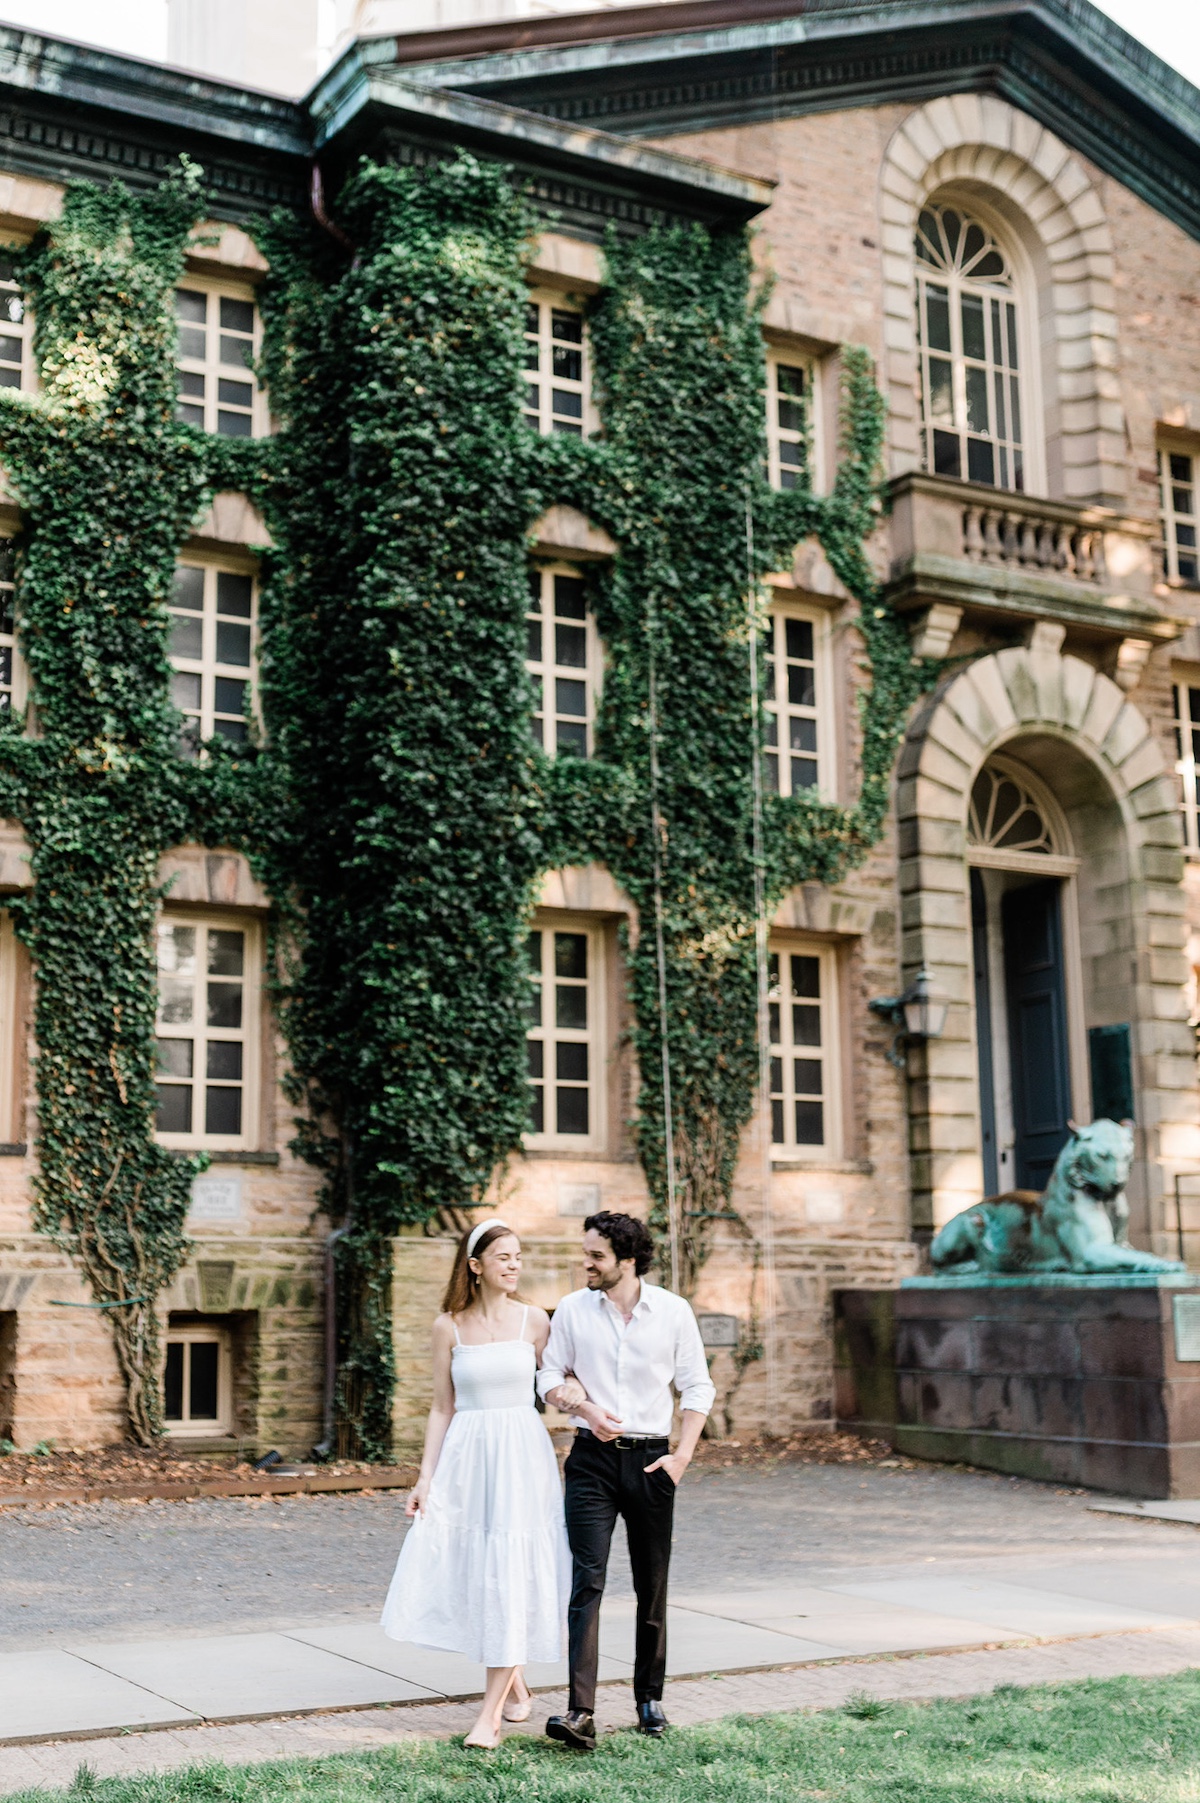 The historic Nassau Hall at Princeton University, a stunning backdrop for the engaged couple's intimate moments.